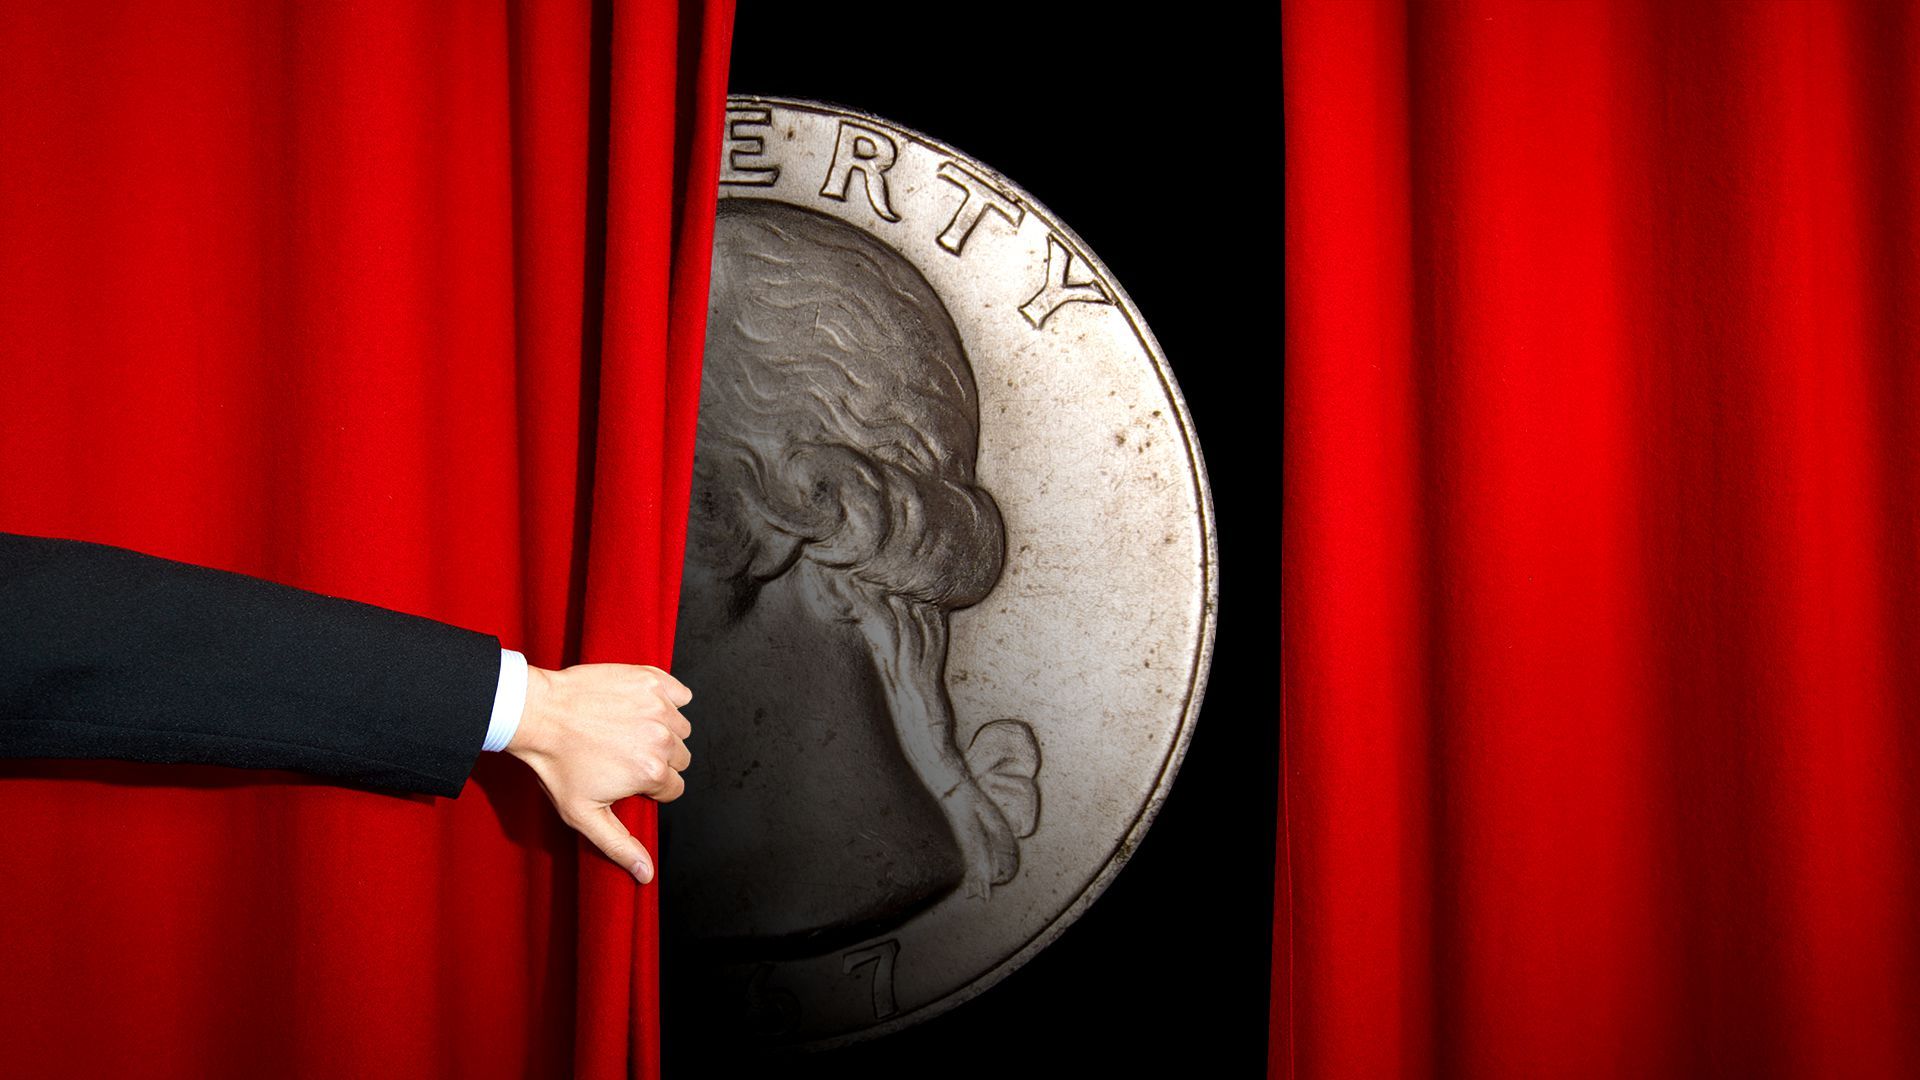 Illustration of a hand pulling back a red curtain to reveal a darkly lit U.S. quarter dollar